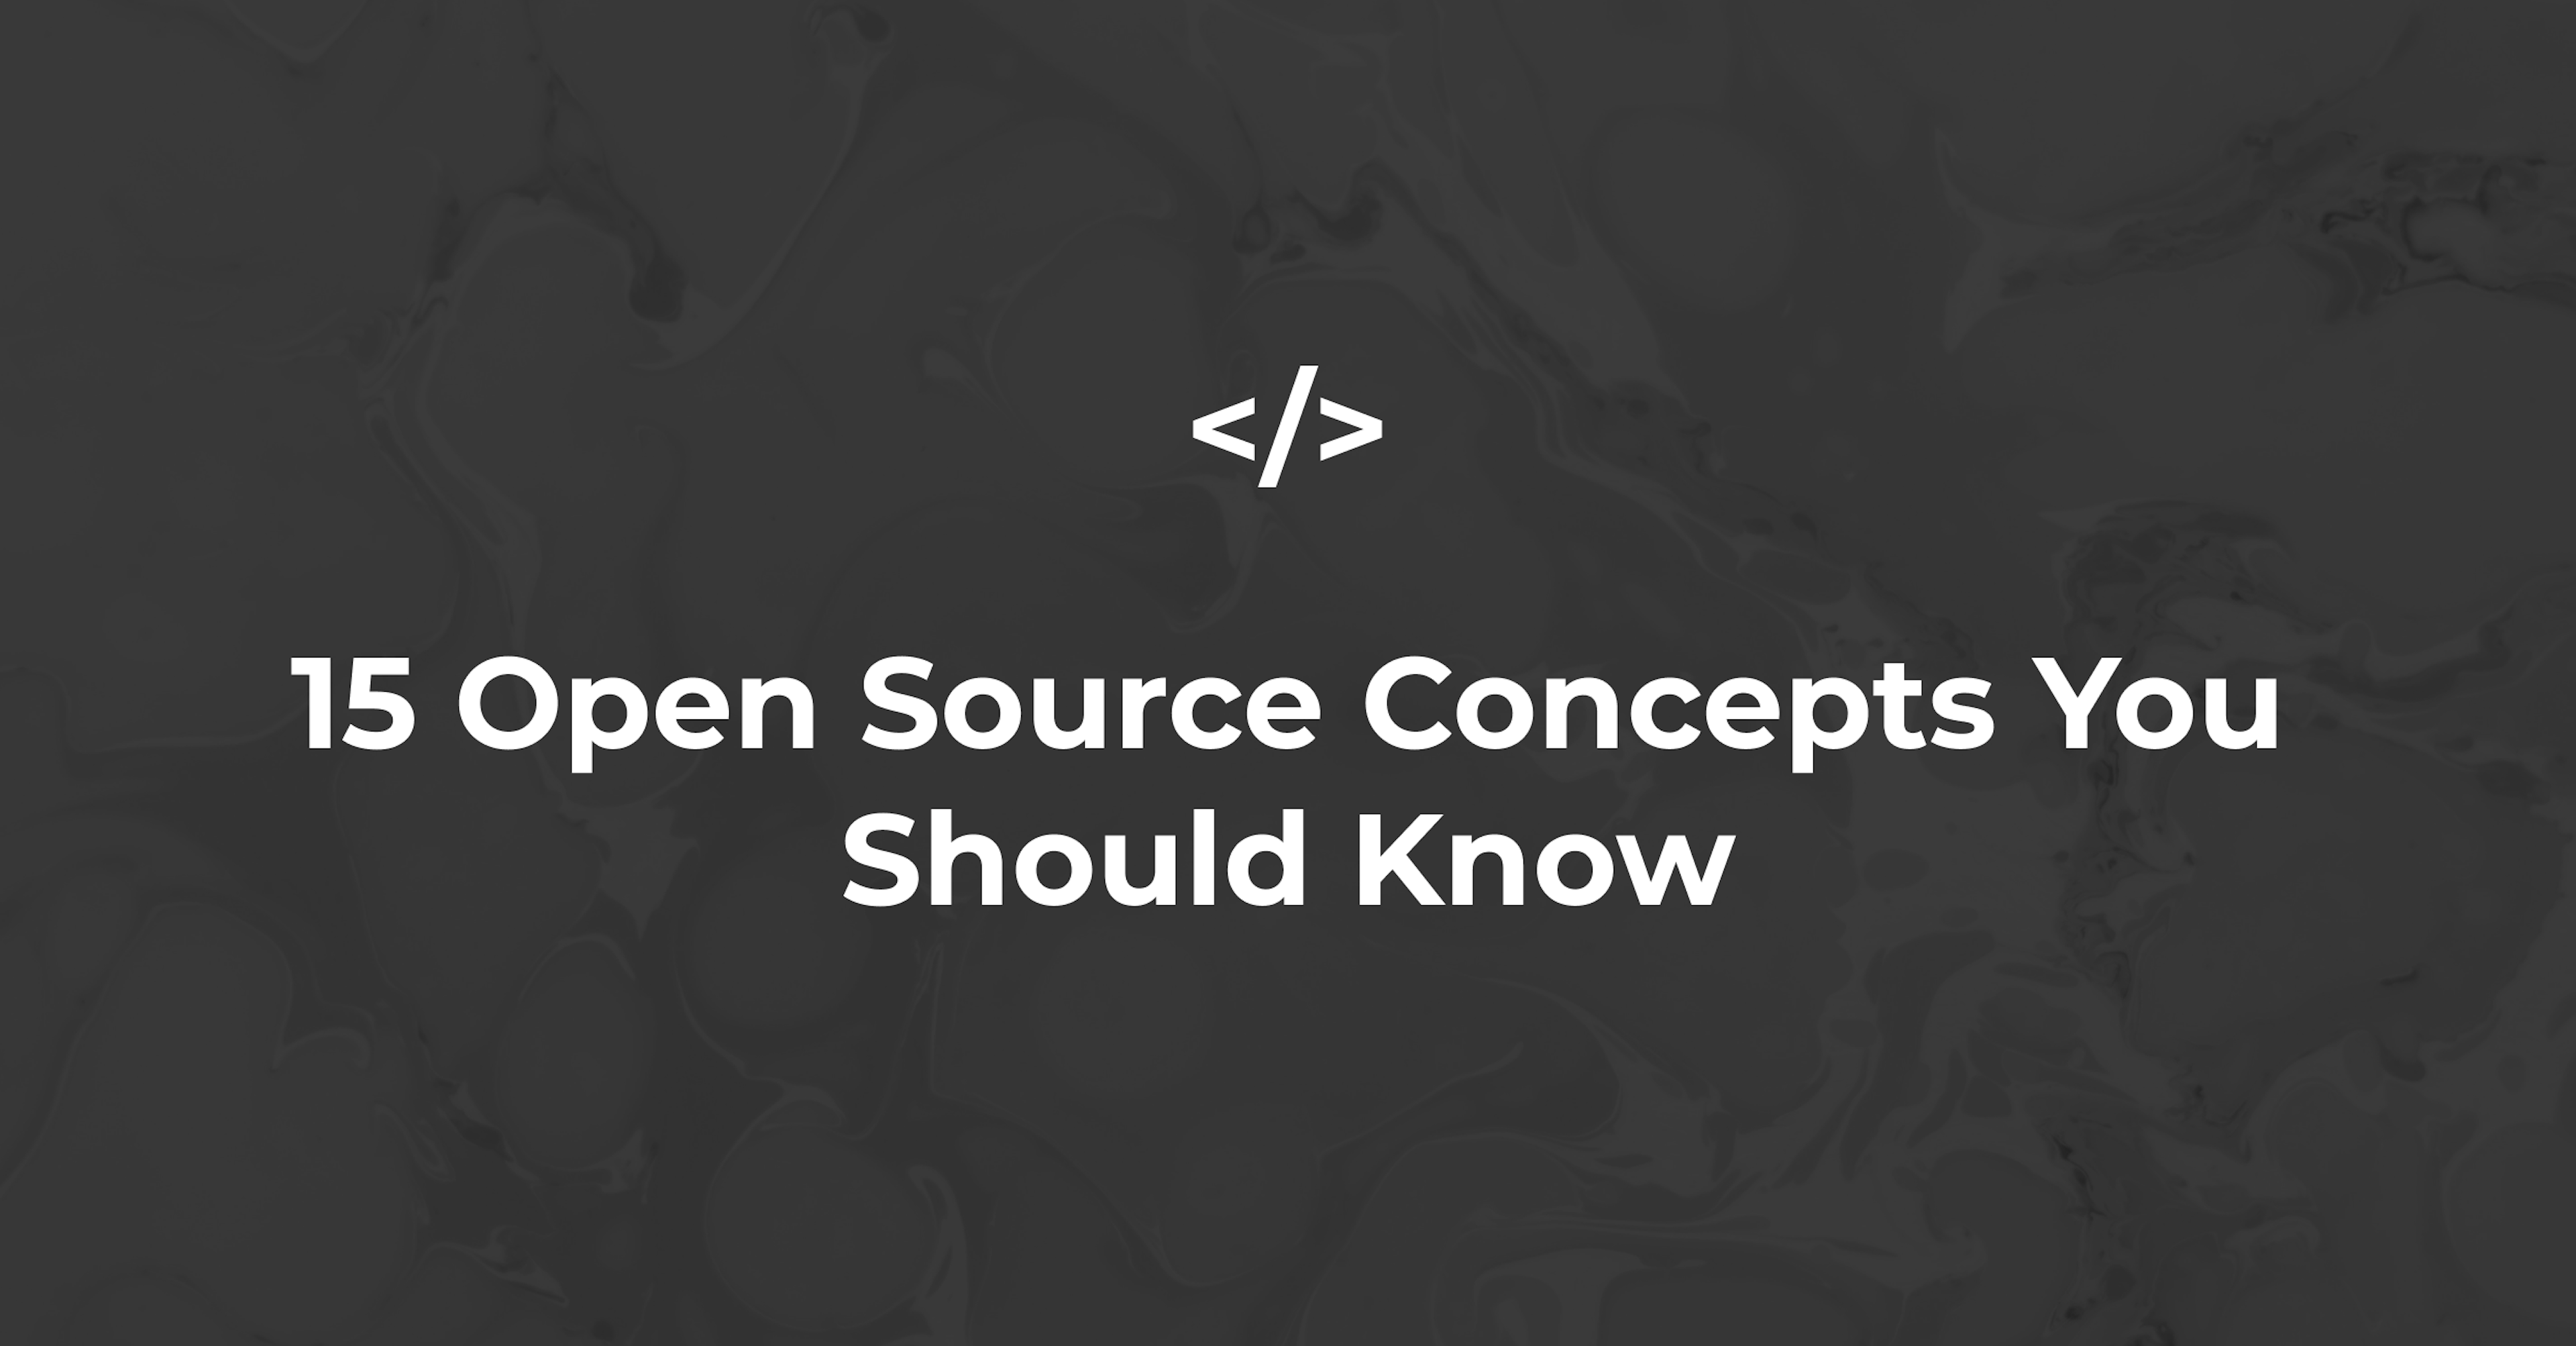 15 Open Source Concepts You Should Know